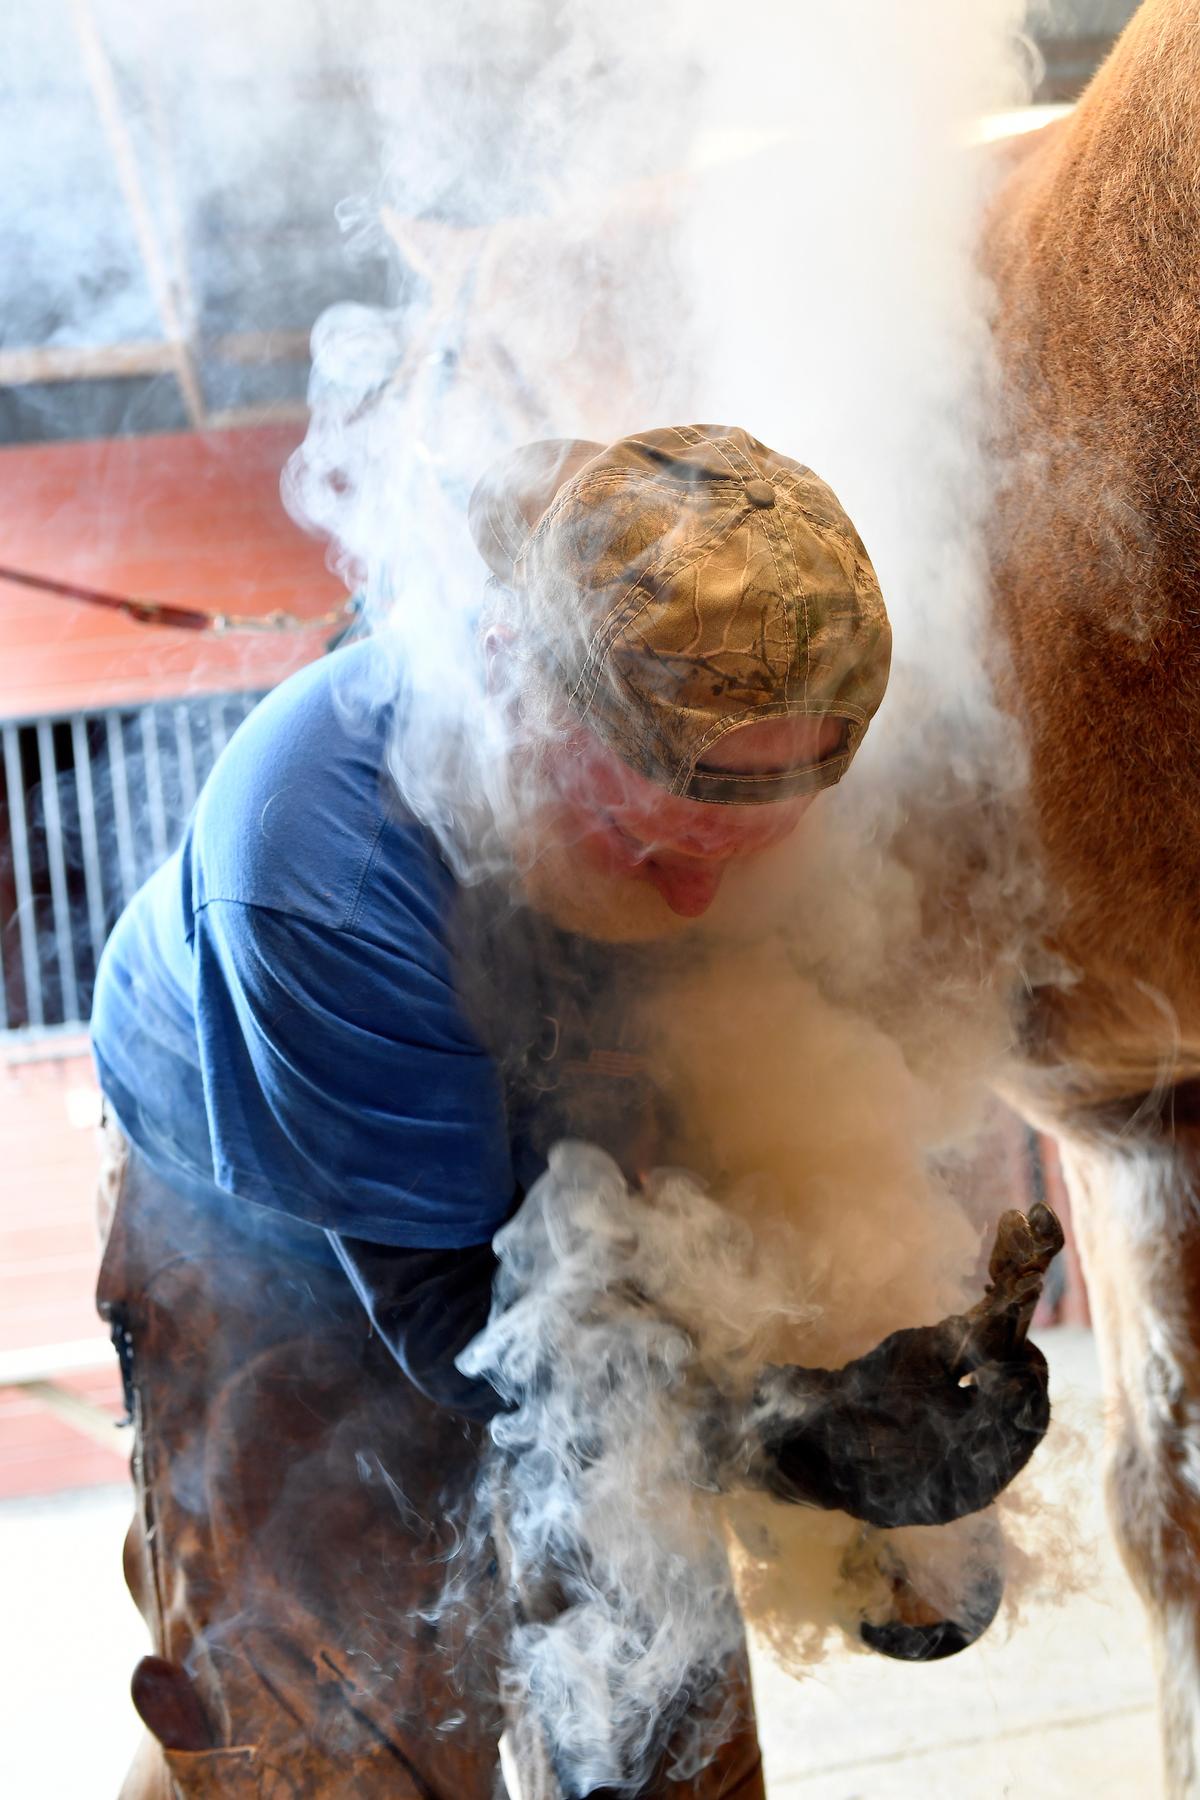 Placing a heated new horseshoe on the hoof. (Randy Litzinger for The Epoch Times)